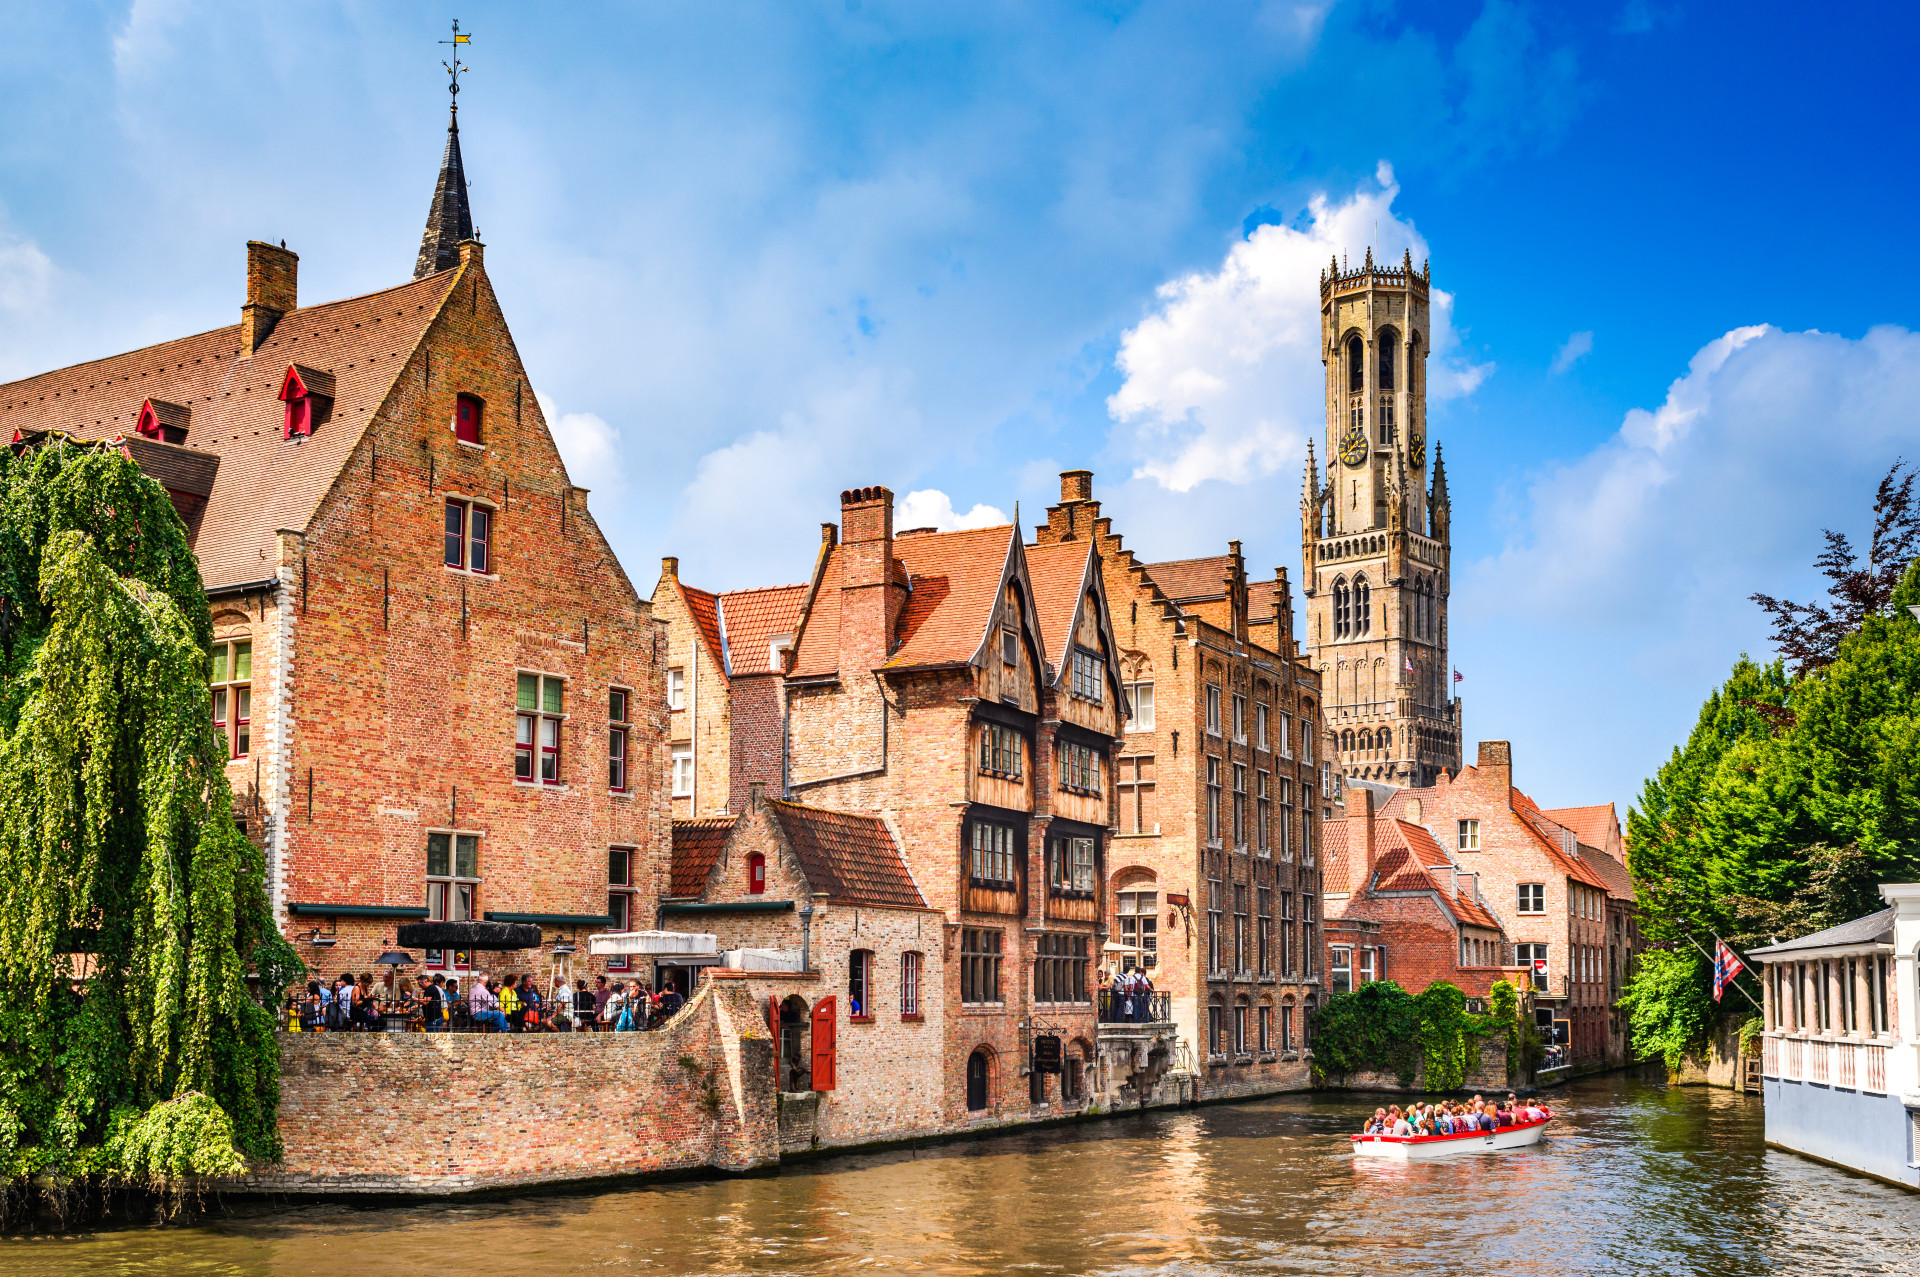 Lovebirds will adore this city! The fairy-tale city of Bruges really does honor its nickname: "the Venice of the North." Bruges will truly mesmerize you with its gorgeous canals. It's therefore no surprise that the Historic Center of Bruges was added to UNESCO's World Heritage List in 2000.<p><a href="https://www.msn.com/en-us/community/channel/vid-7xx8mnucu55yw63we9va2gwr7uihbxwc68fxqp25x6tg4ftibpra?cvid=94631541bc0f4f89bfd59158d696ad7e">Follow us and access great exclusive content every day</a></p>